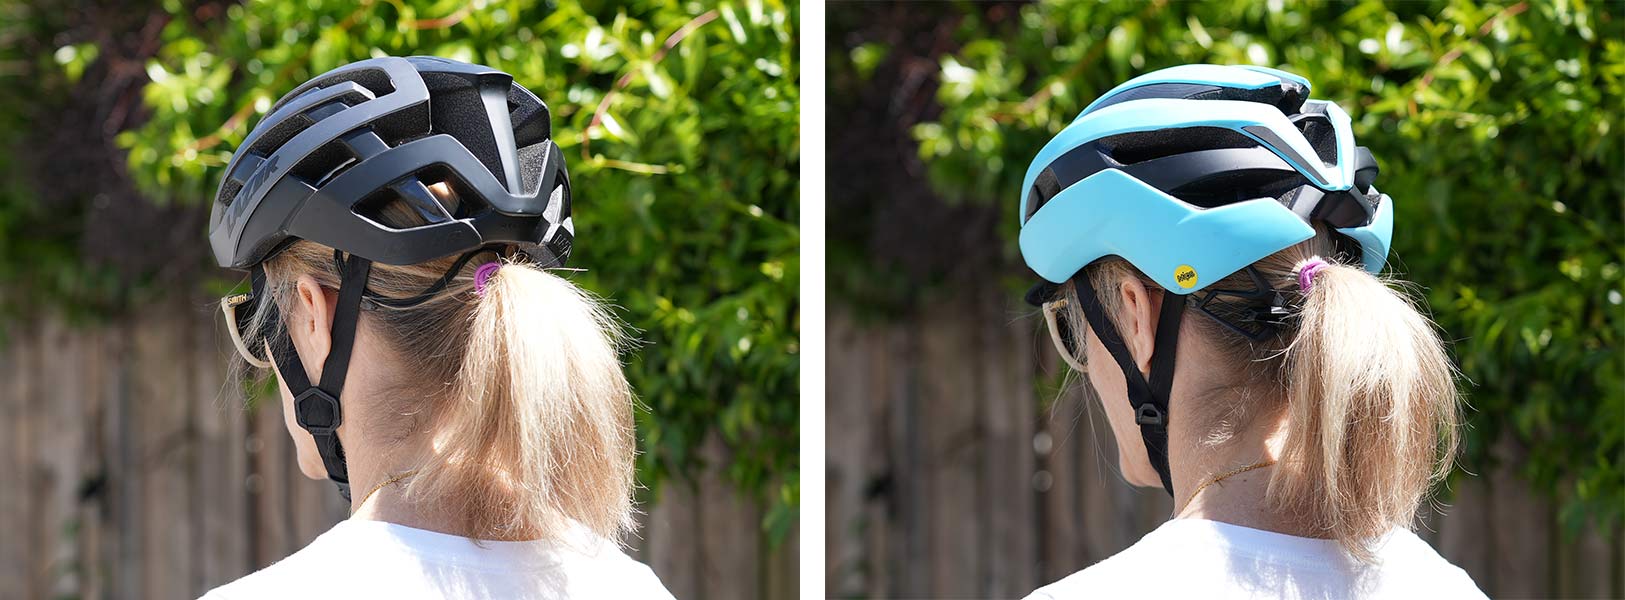 womens bicycle helmets that fit a ponytail